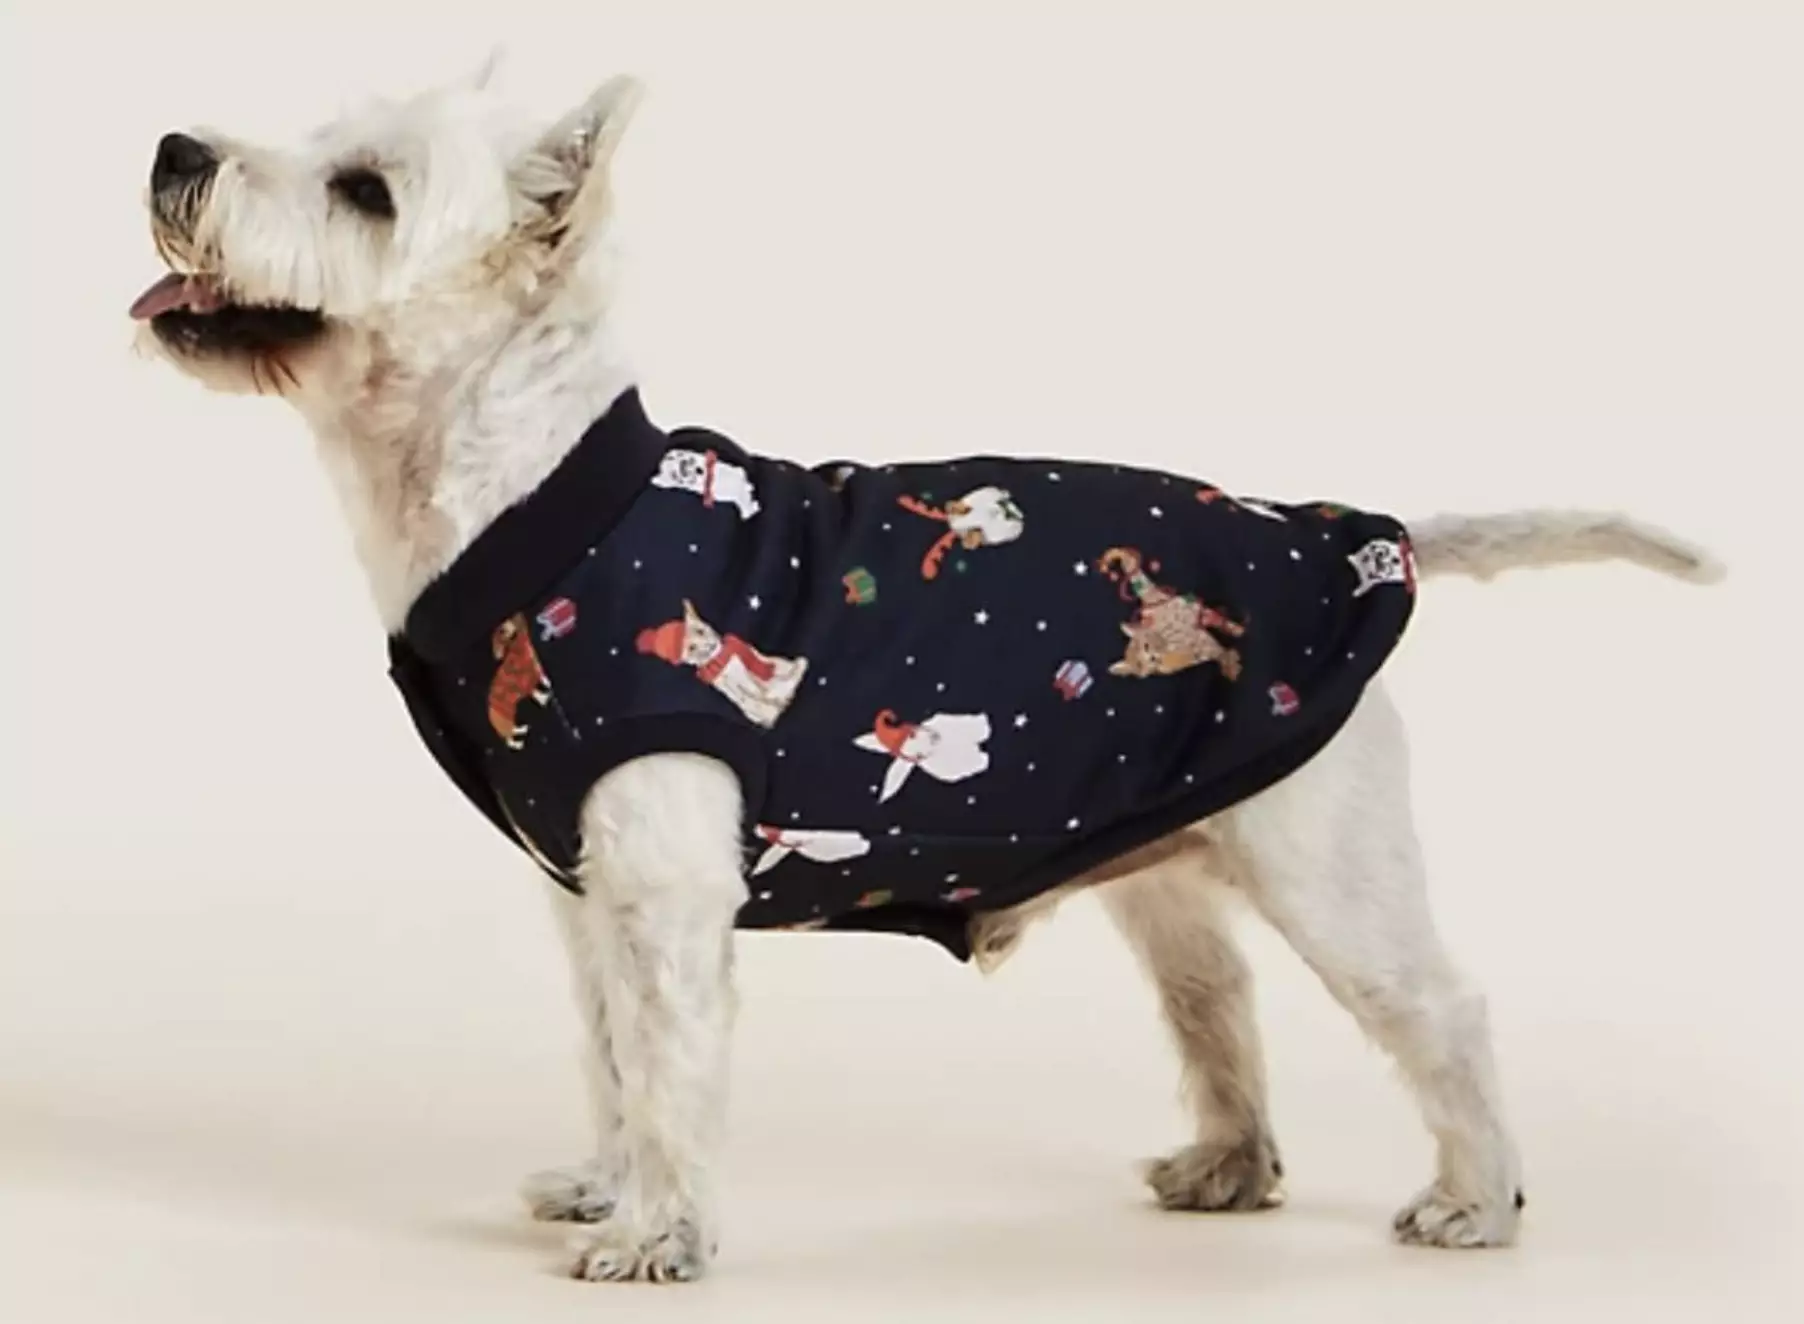 The sets are adorable, with a cute printed jumper for your pooch (